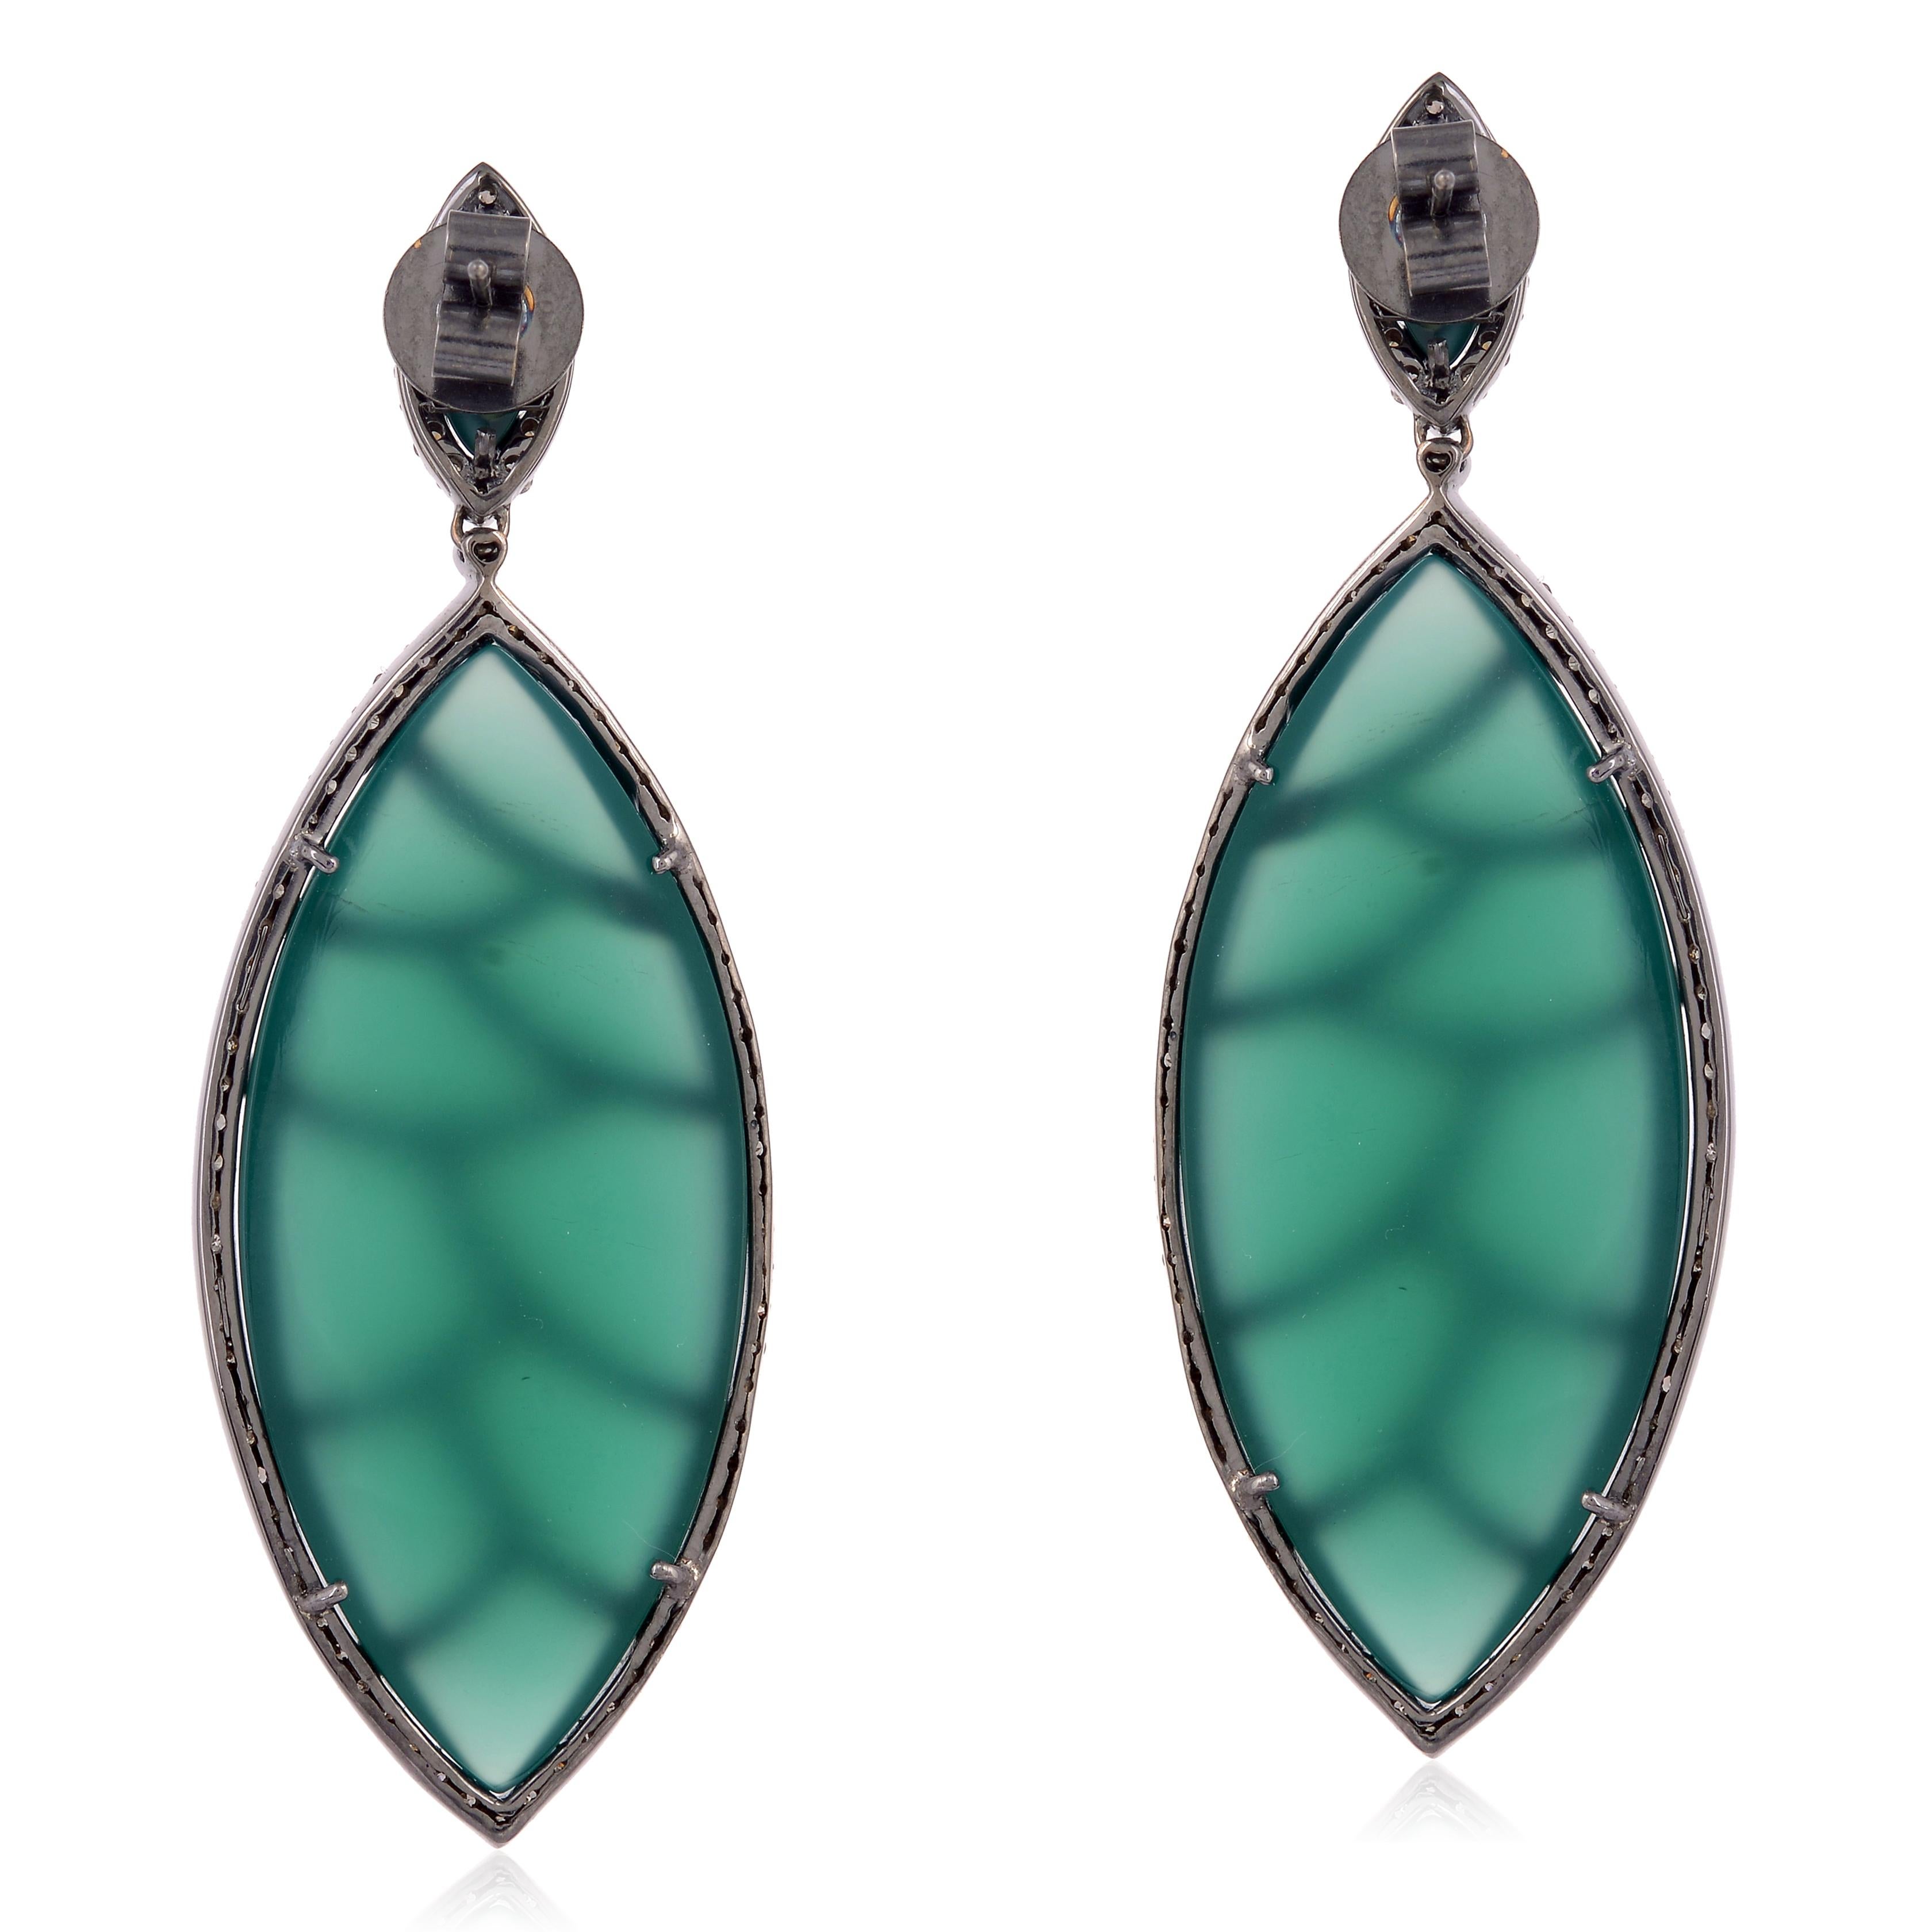 These Bora Bora earrings are cast in 18K gold and sterling silver. It is hand set in 71.25 carat green onyx and 4.45 carat of sparkling diamonds. Complimentary conversion to clip-on earrings is available.

FOLLOW MEGHNA JEWELS storefront to view the